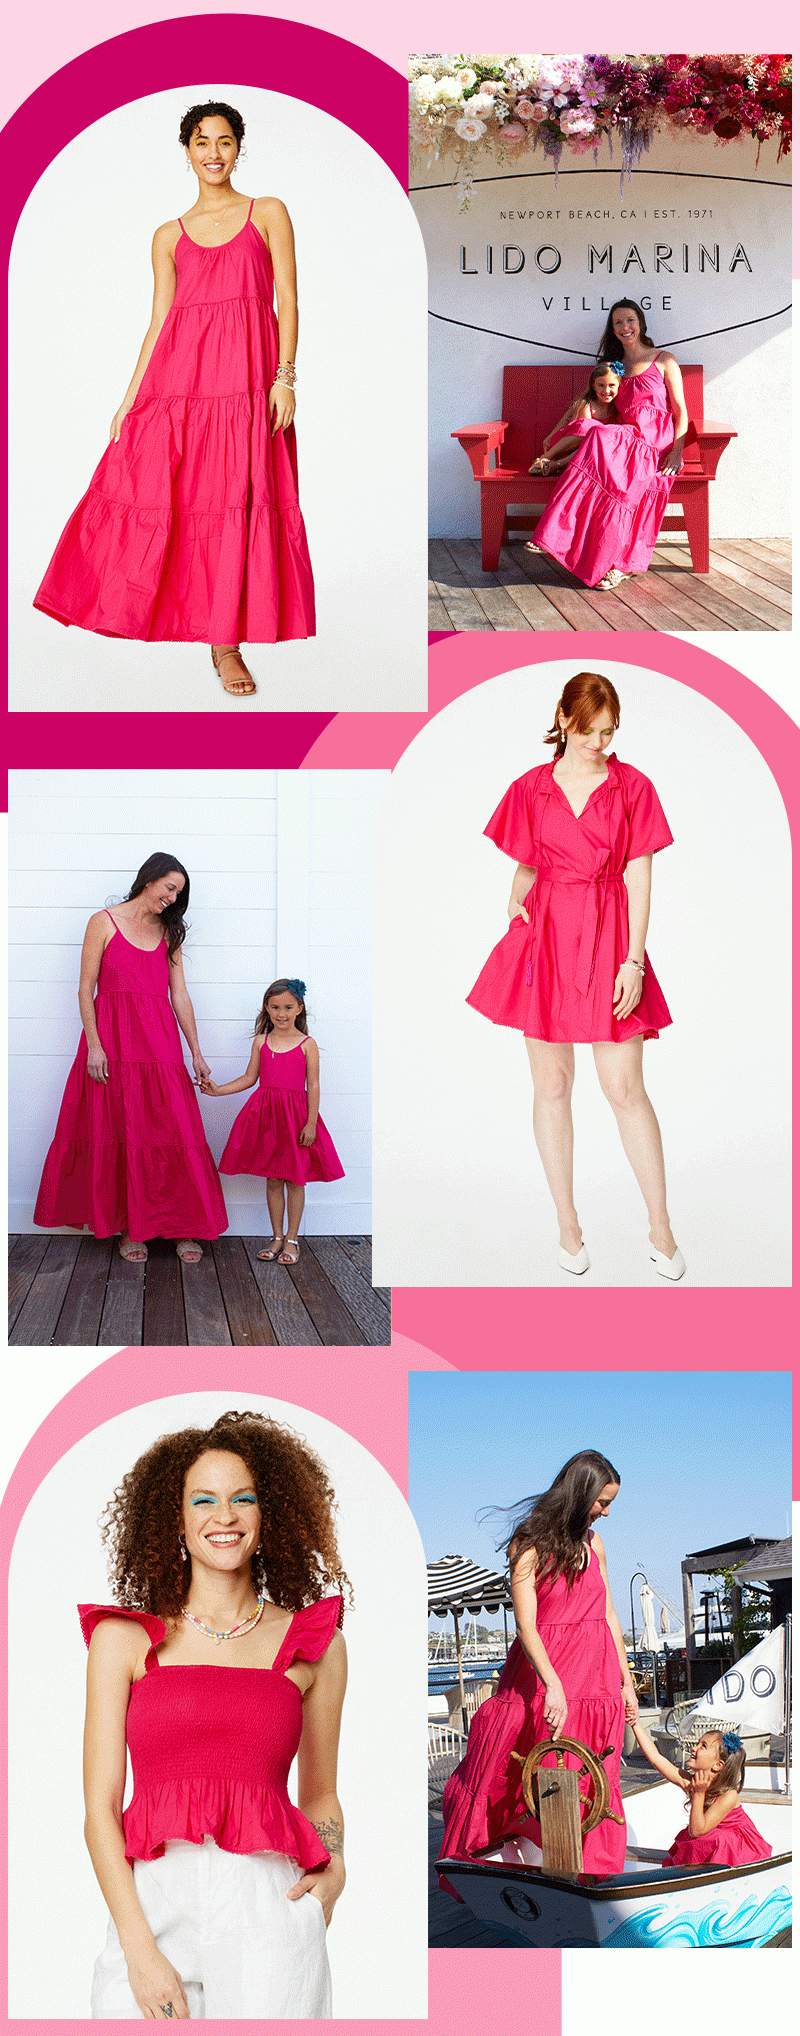 Grid collection of the new Roller Rabbit Hot Pink Poplin styles, the Dakota Dress, the Temmy Dress (now with belt), and the Dove Top